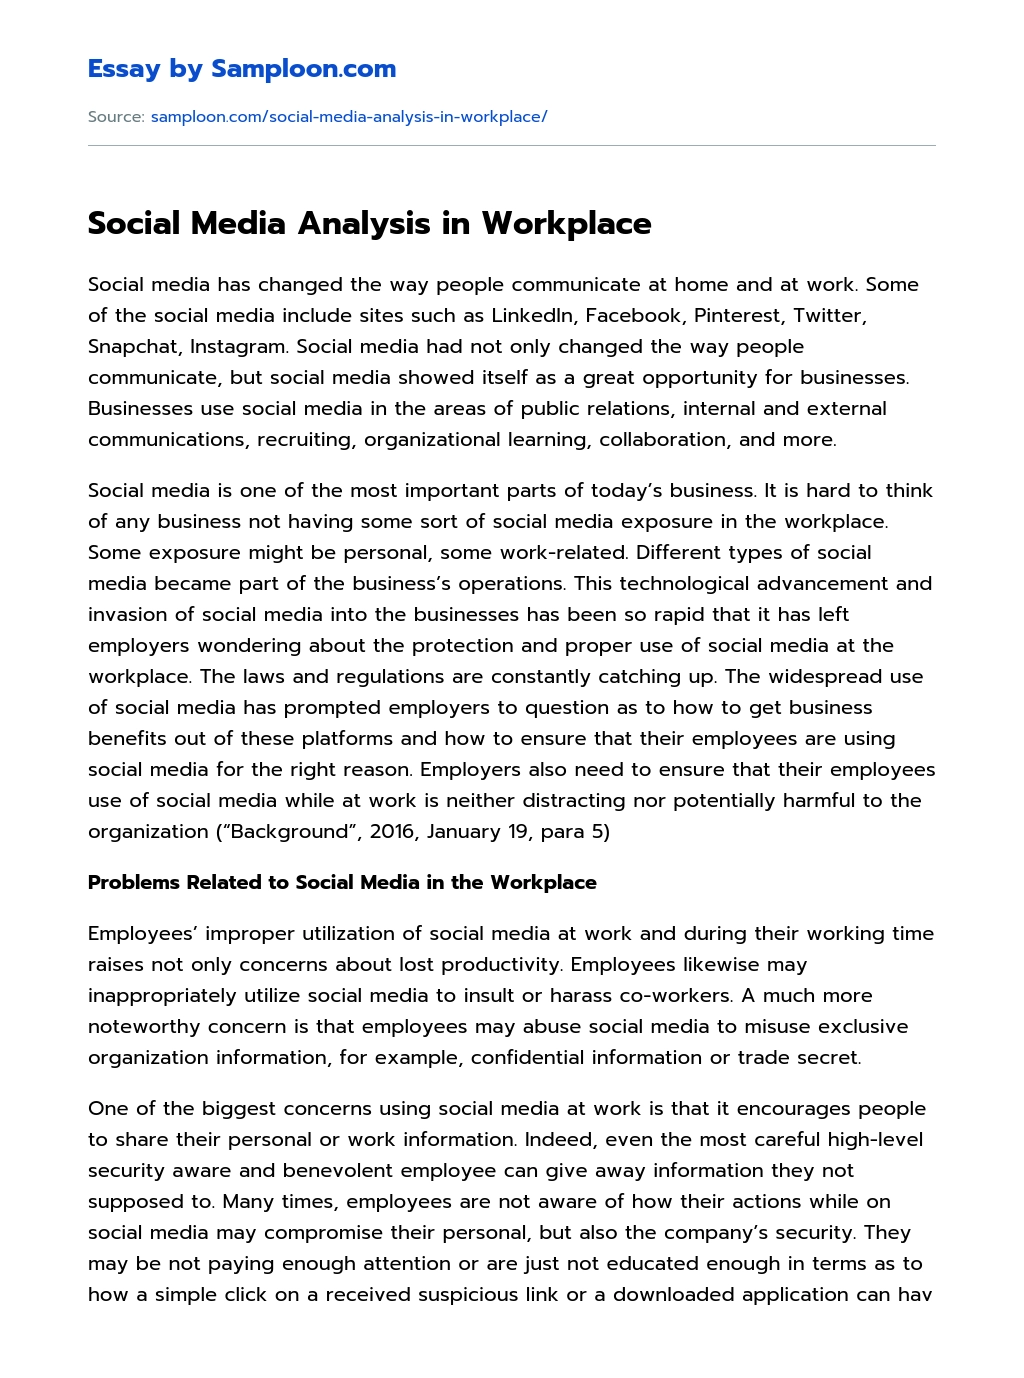 Social Media Analysis in Workplace essay